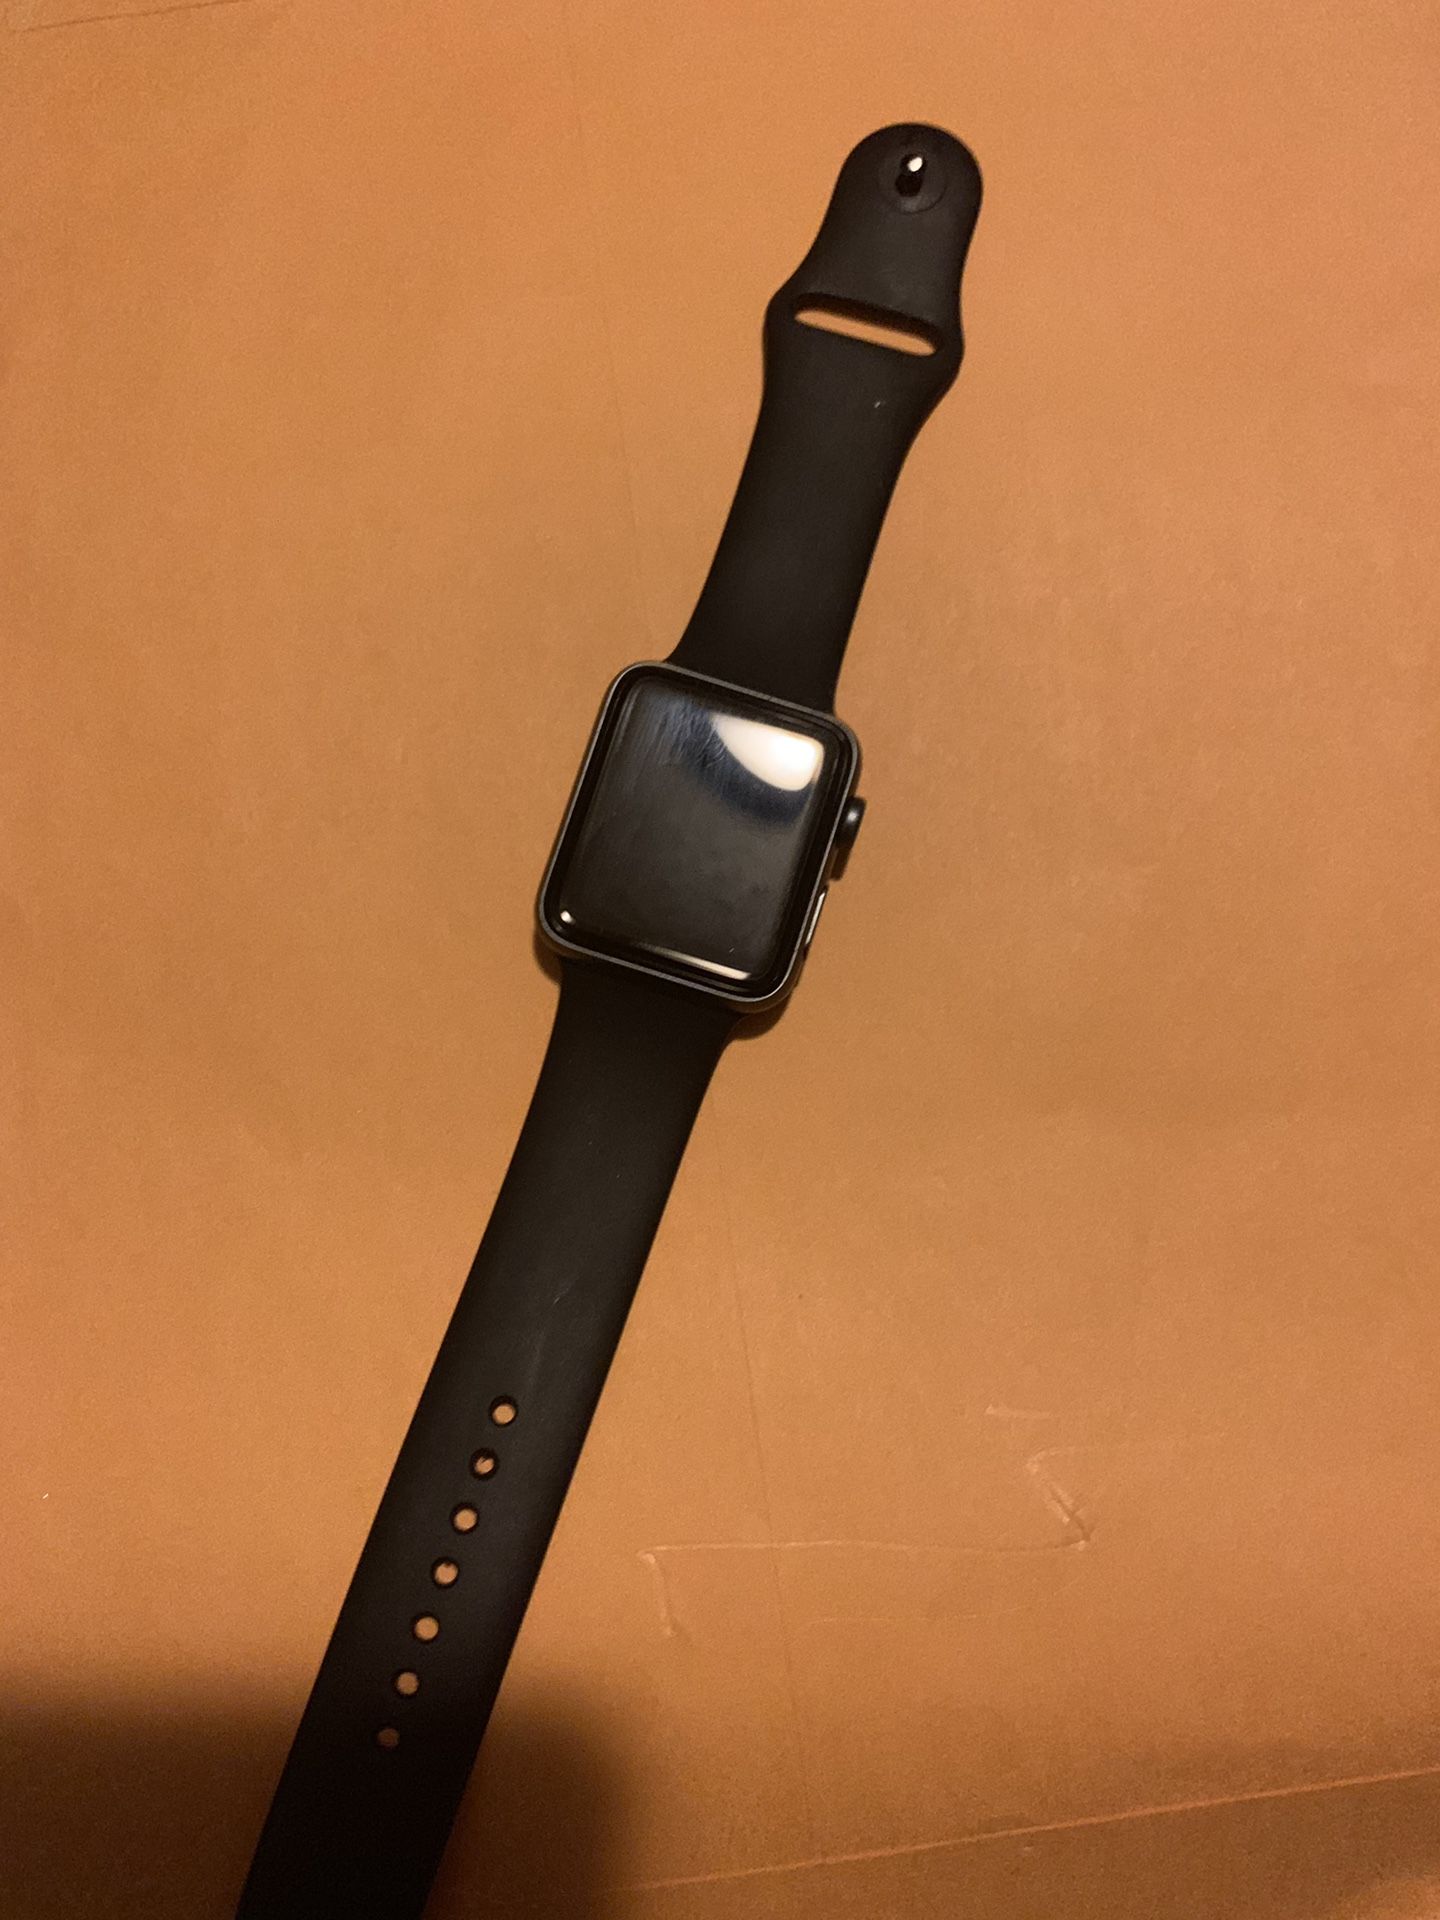 Apple Watch series 3 in great conditions no scratches